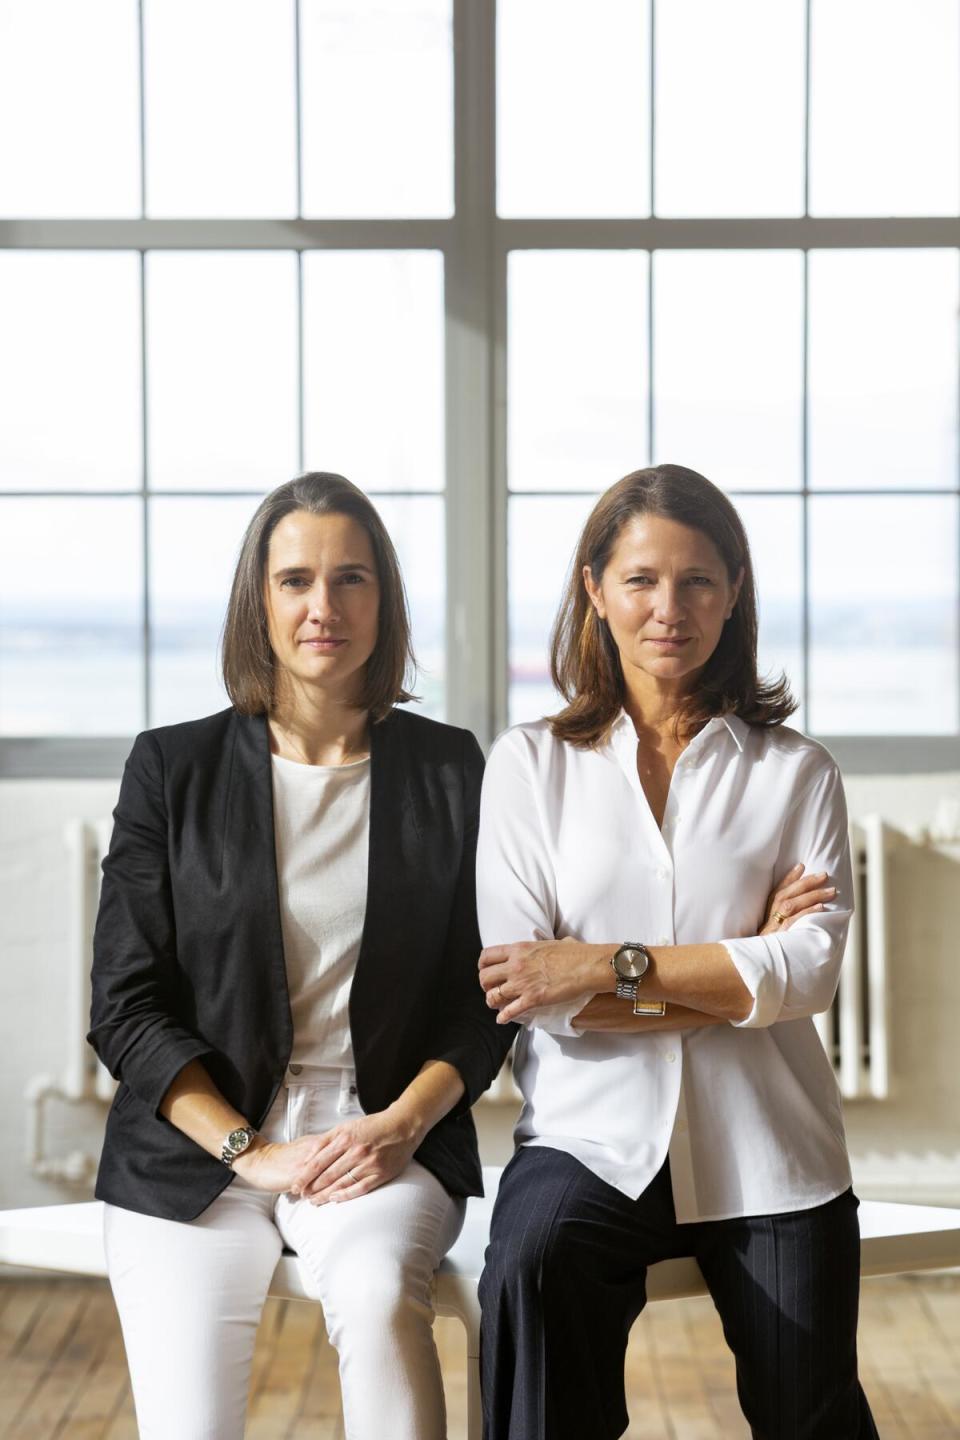 ICFF brand directors Claire Pijoulat (left) and Odile Hainaut